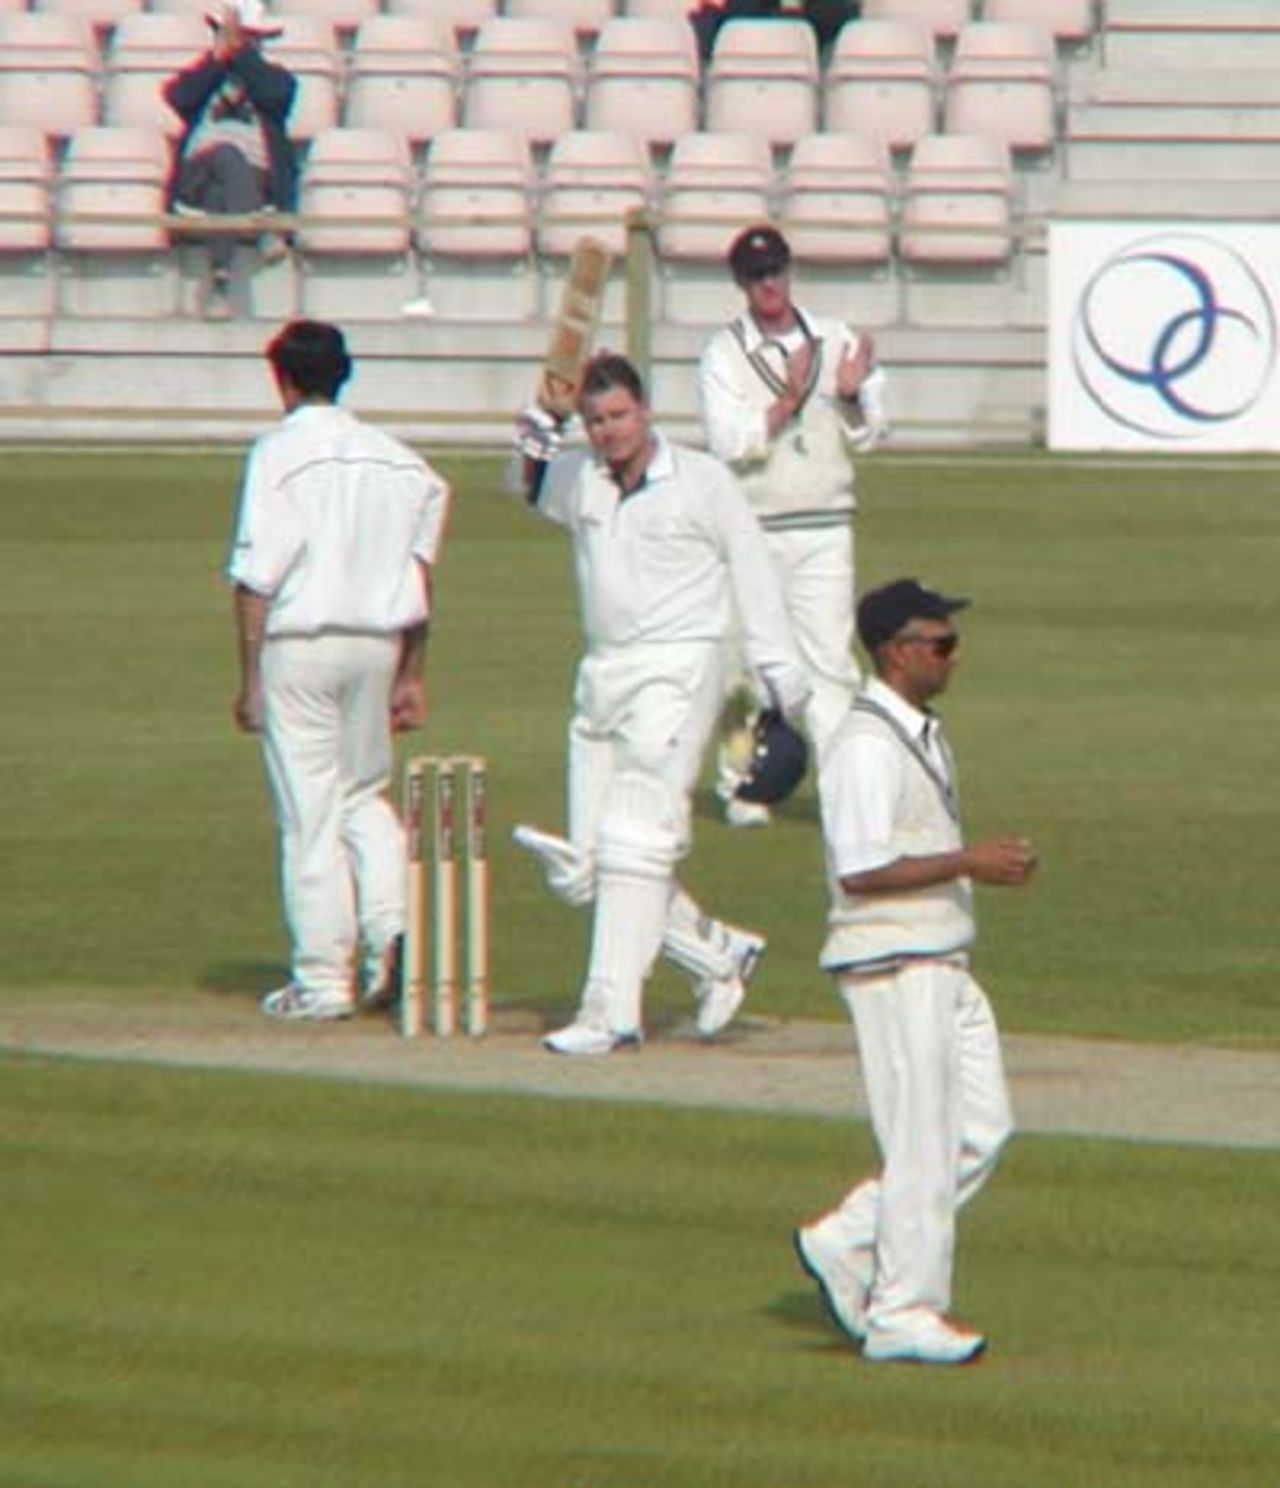 Robin Smith acknowedges the applaus after a brave 5 hour innings brings up his 60th first-class century.